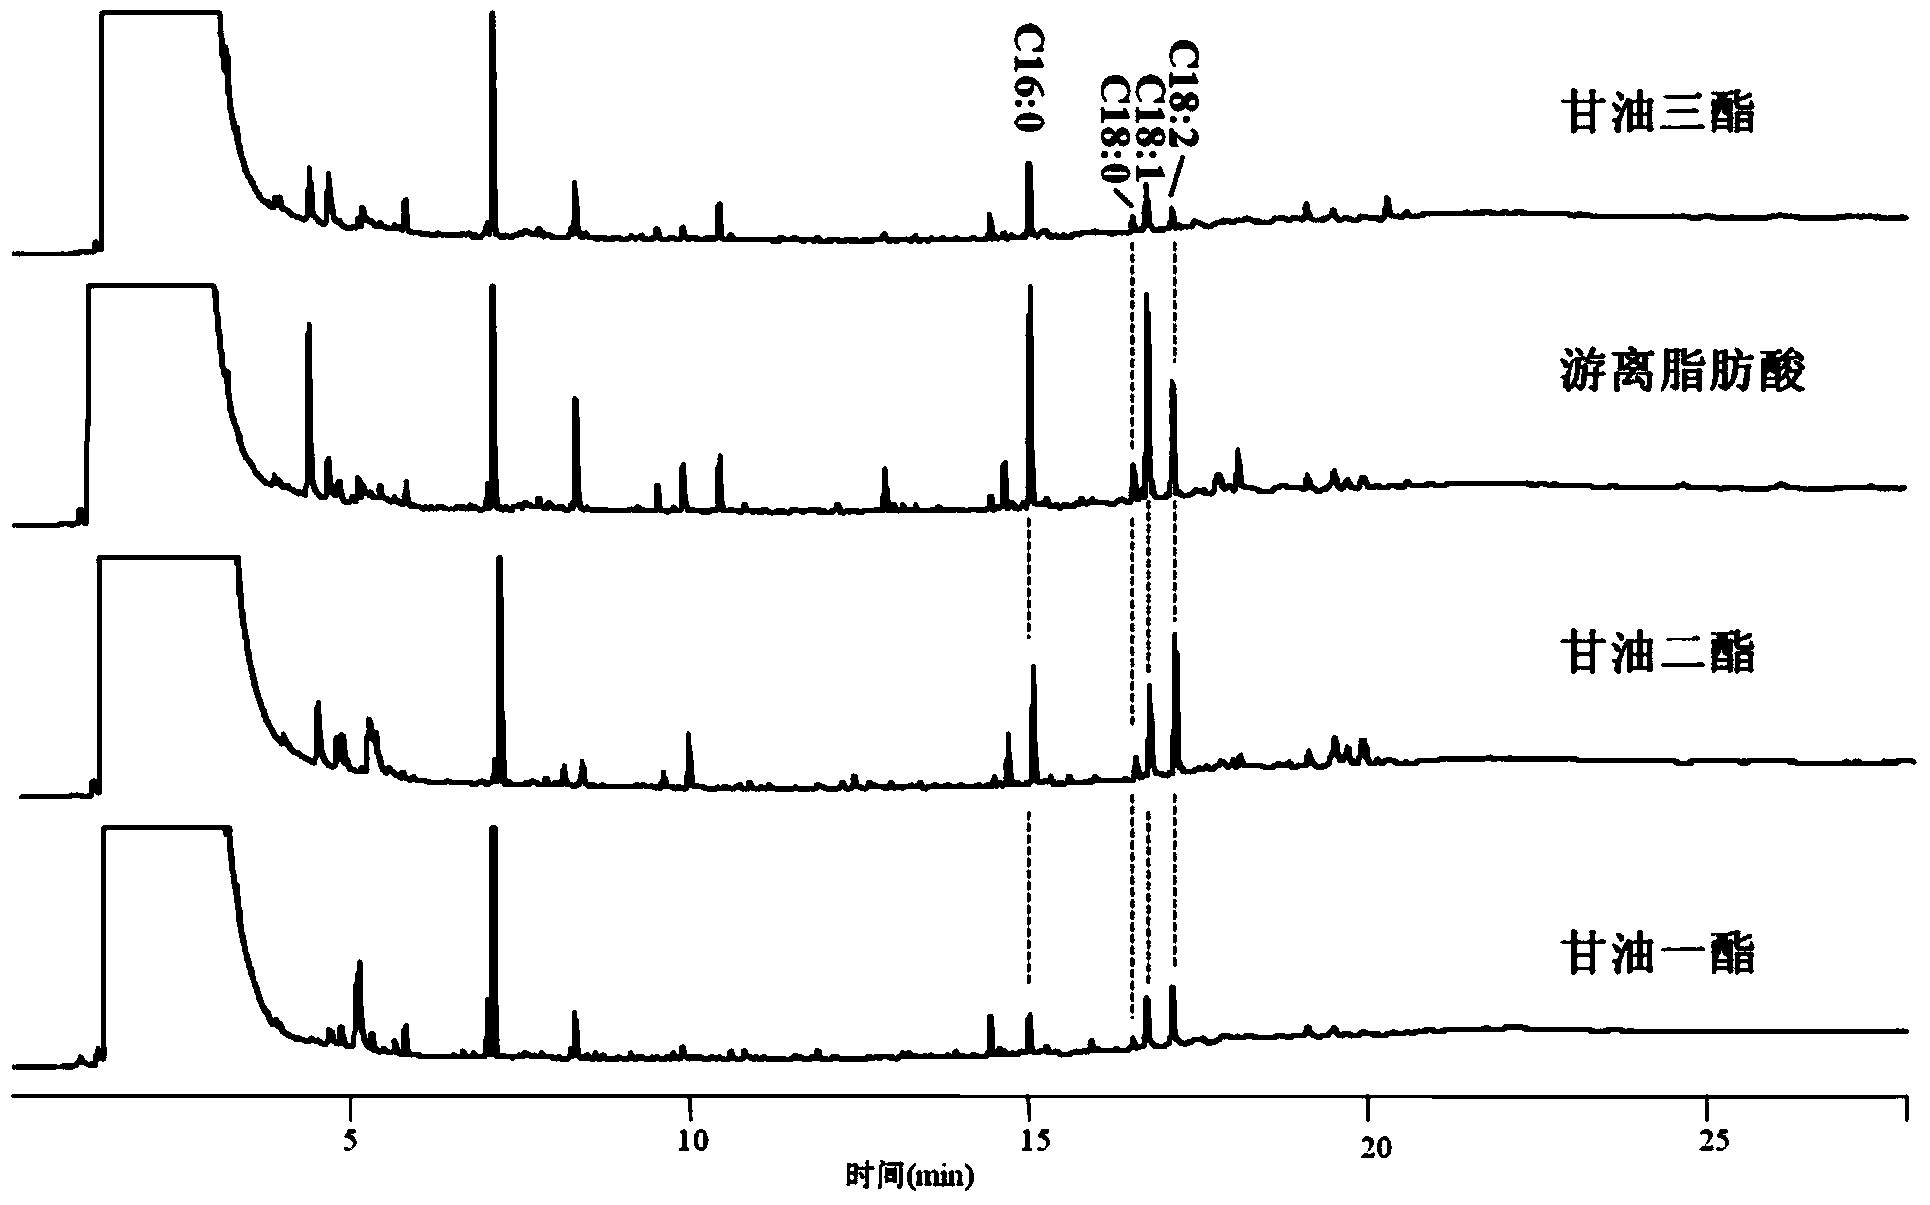 Method for detecting contents of glyceride and free fatty acid in biodiesel